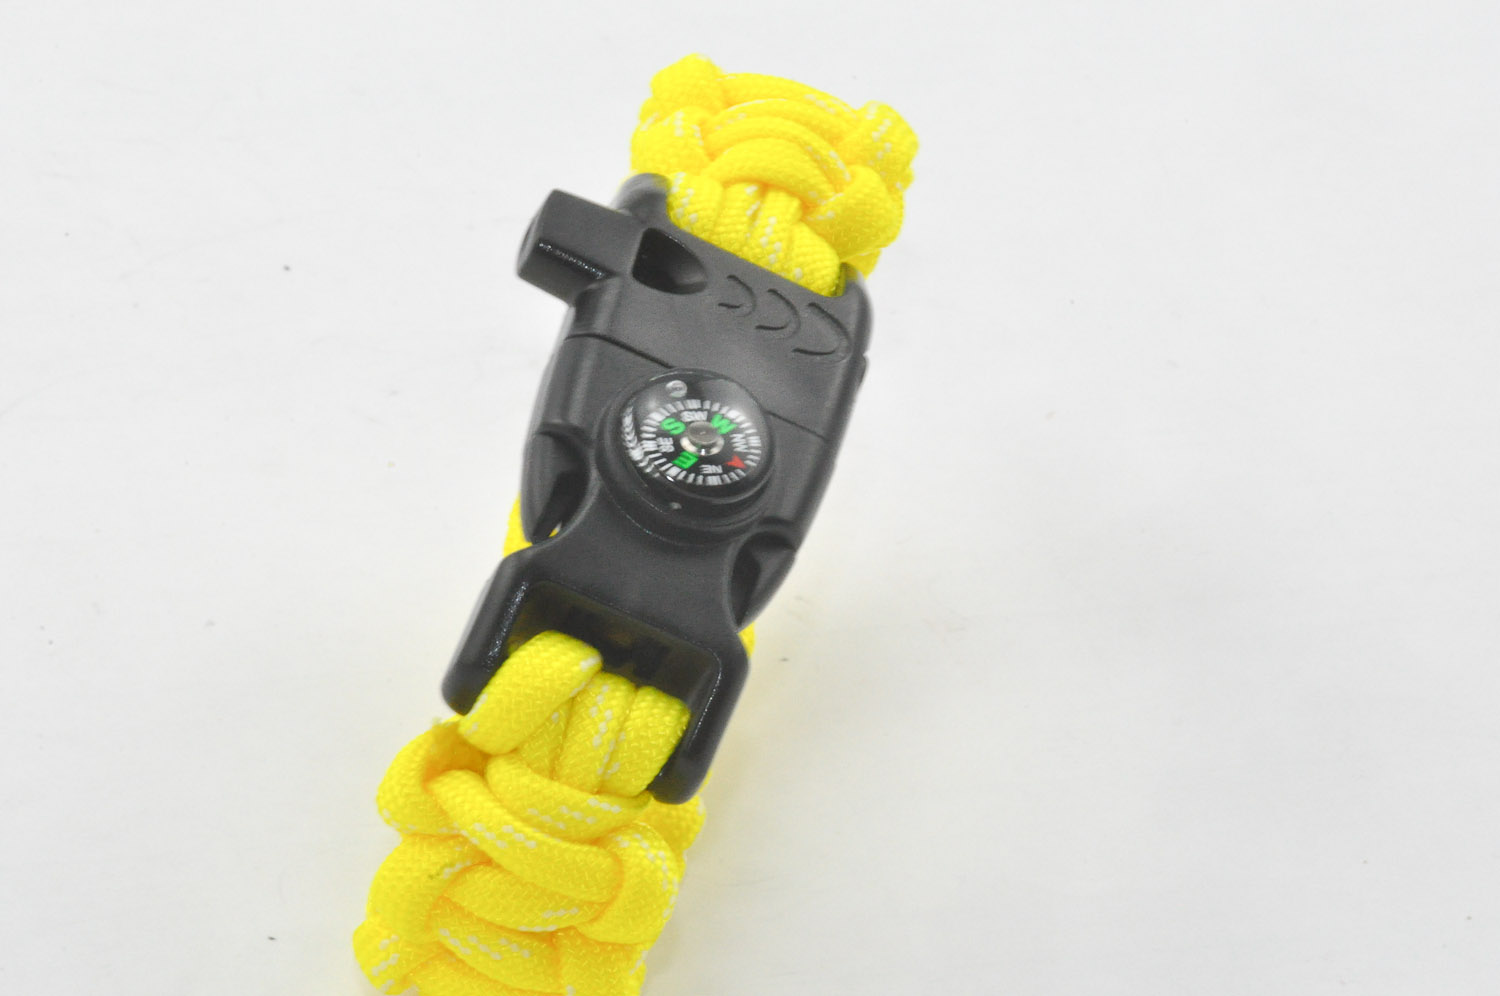 BRACCIALE PARACORD 550 GLOW 6 in 1 - con Manuale - YELLOW GLOW IN THE DARK